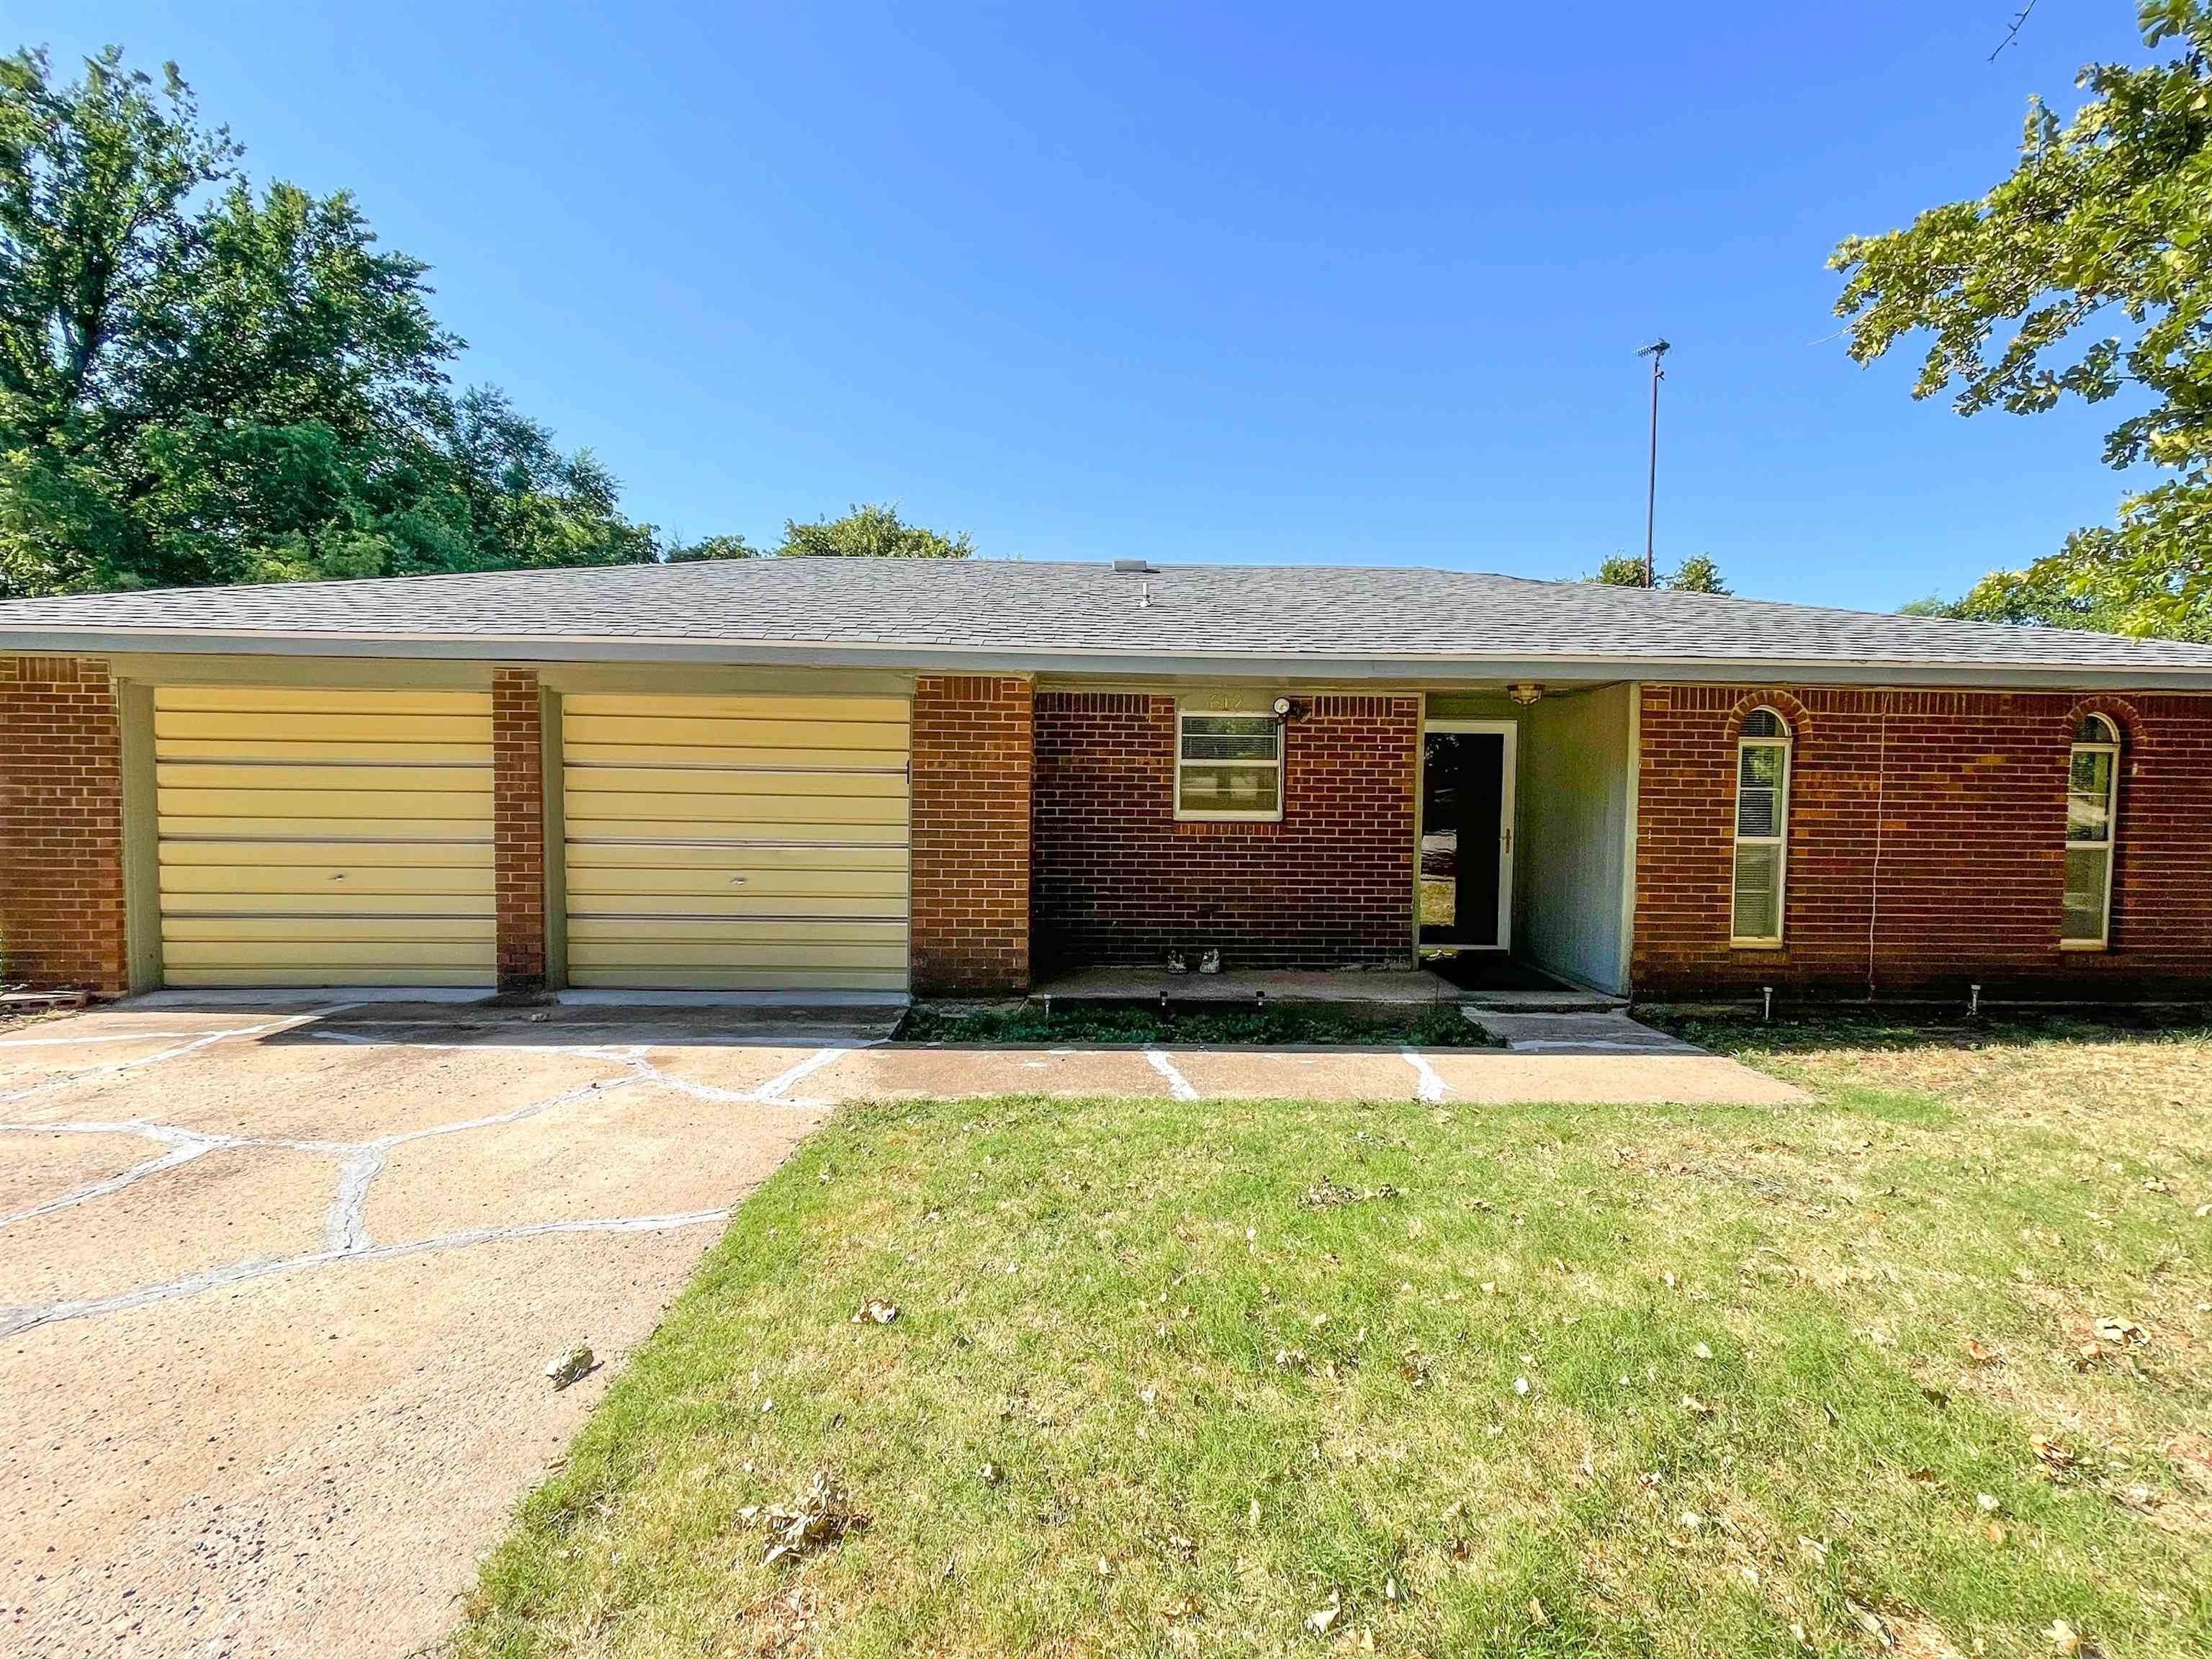 Single Family for Sale at Ringwood, OK 73768